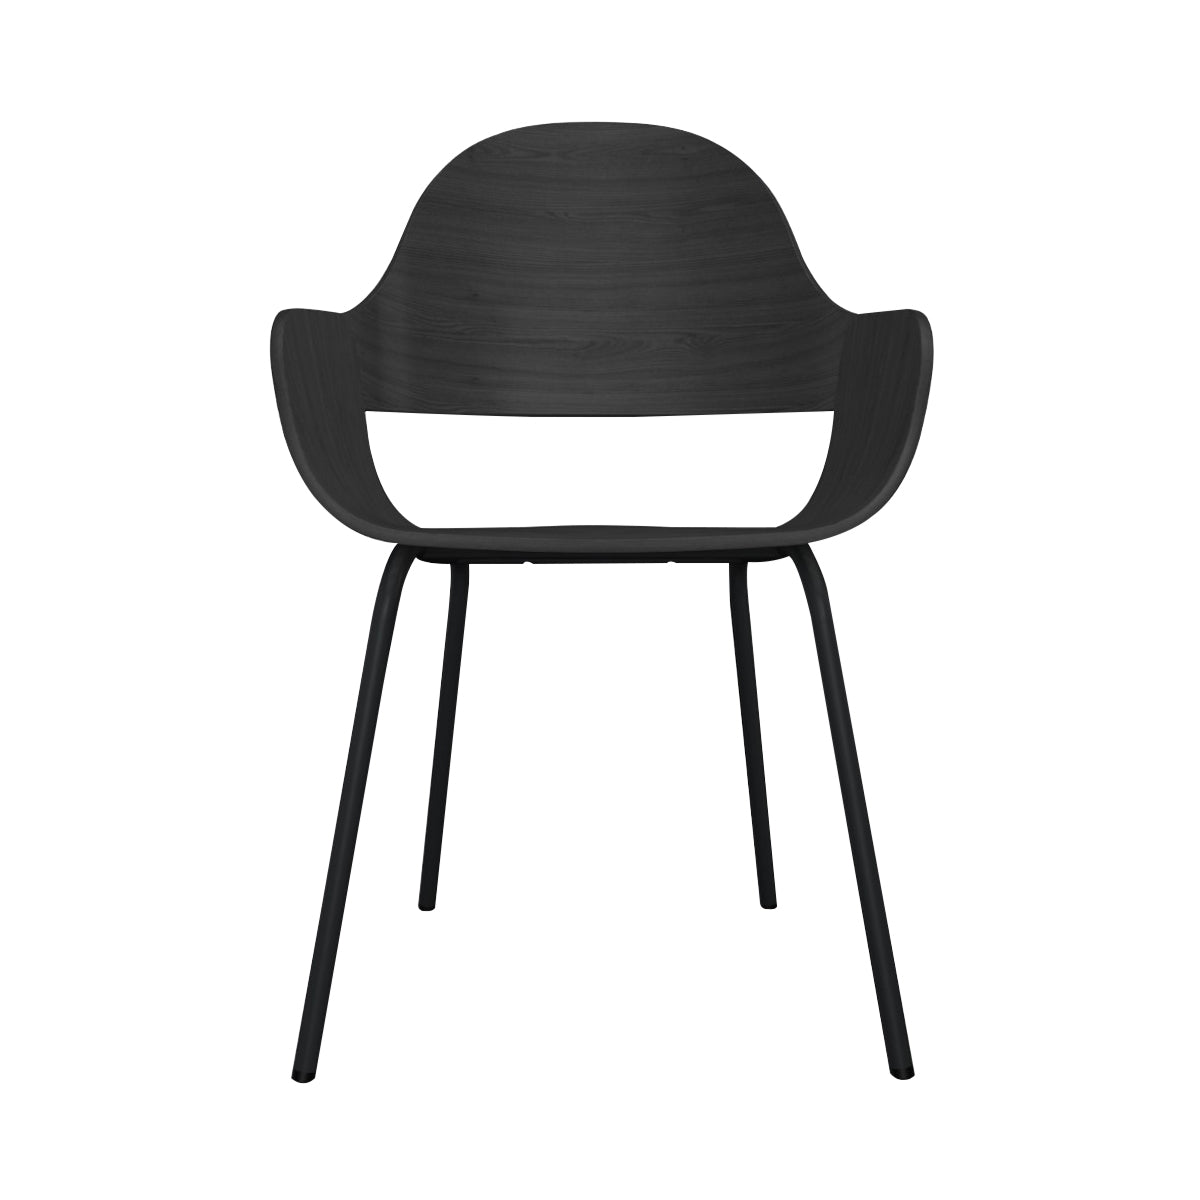 Showtime Nude Chair with Metal Legs: Ash Stained Black + Anthracite Grey